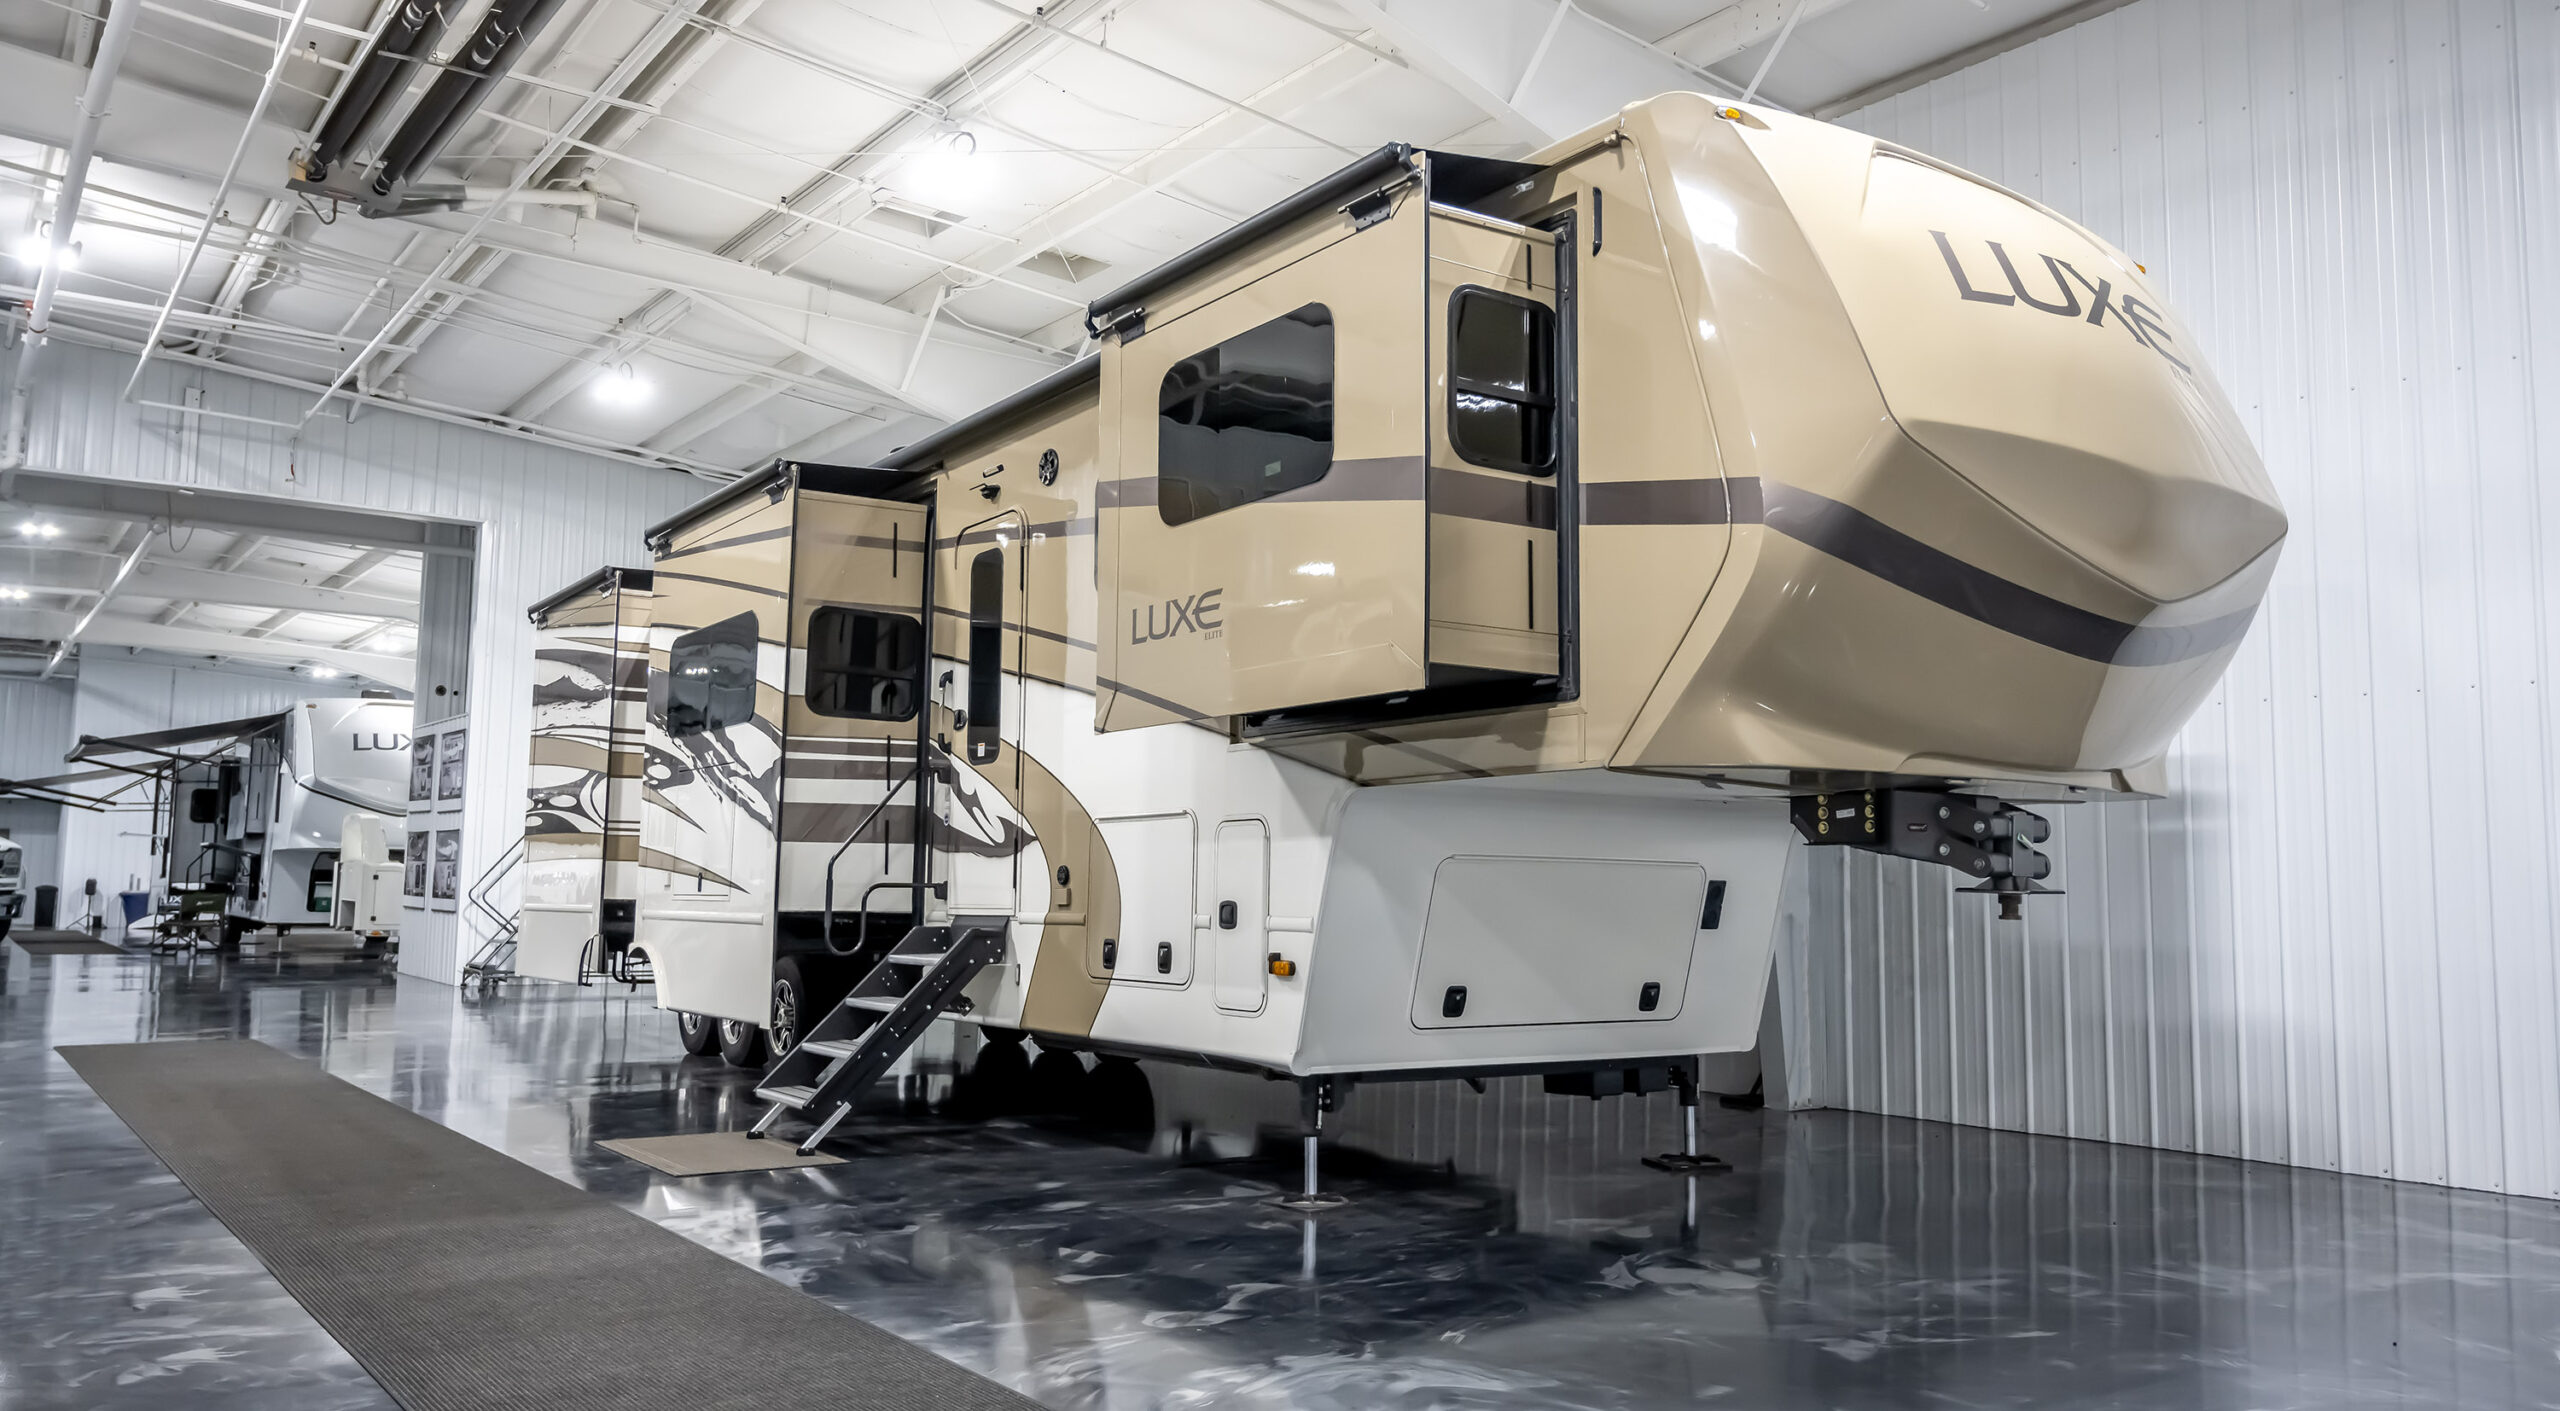 A Luxe Elite on display at the Luxe 5th Wheel showroom in Elkhart, Indiana.